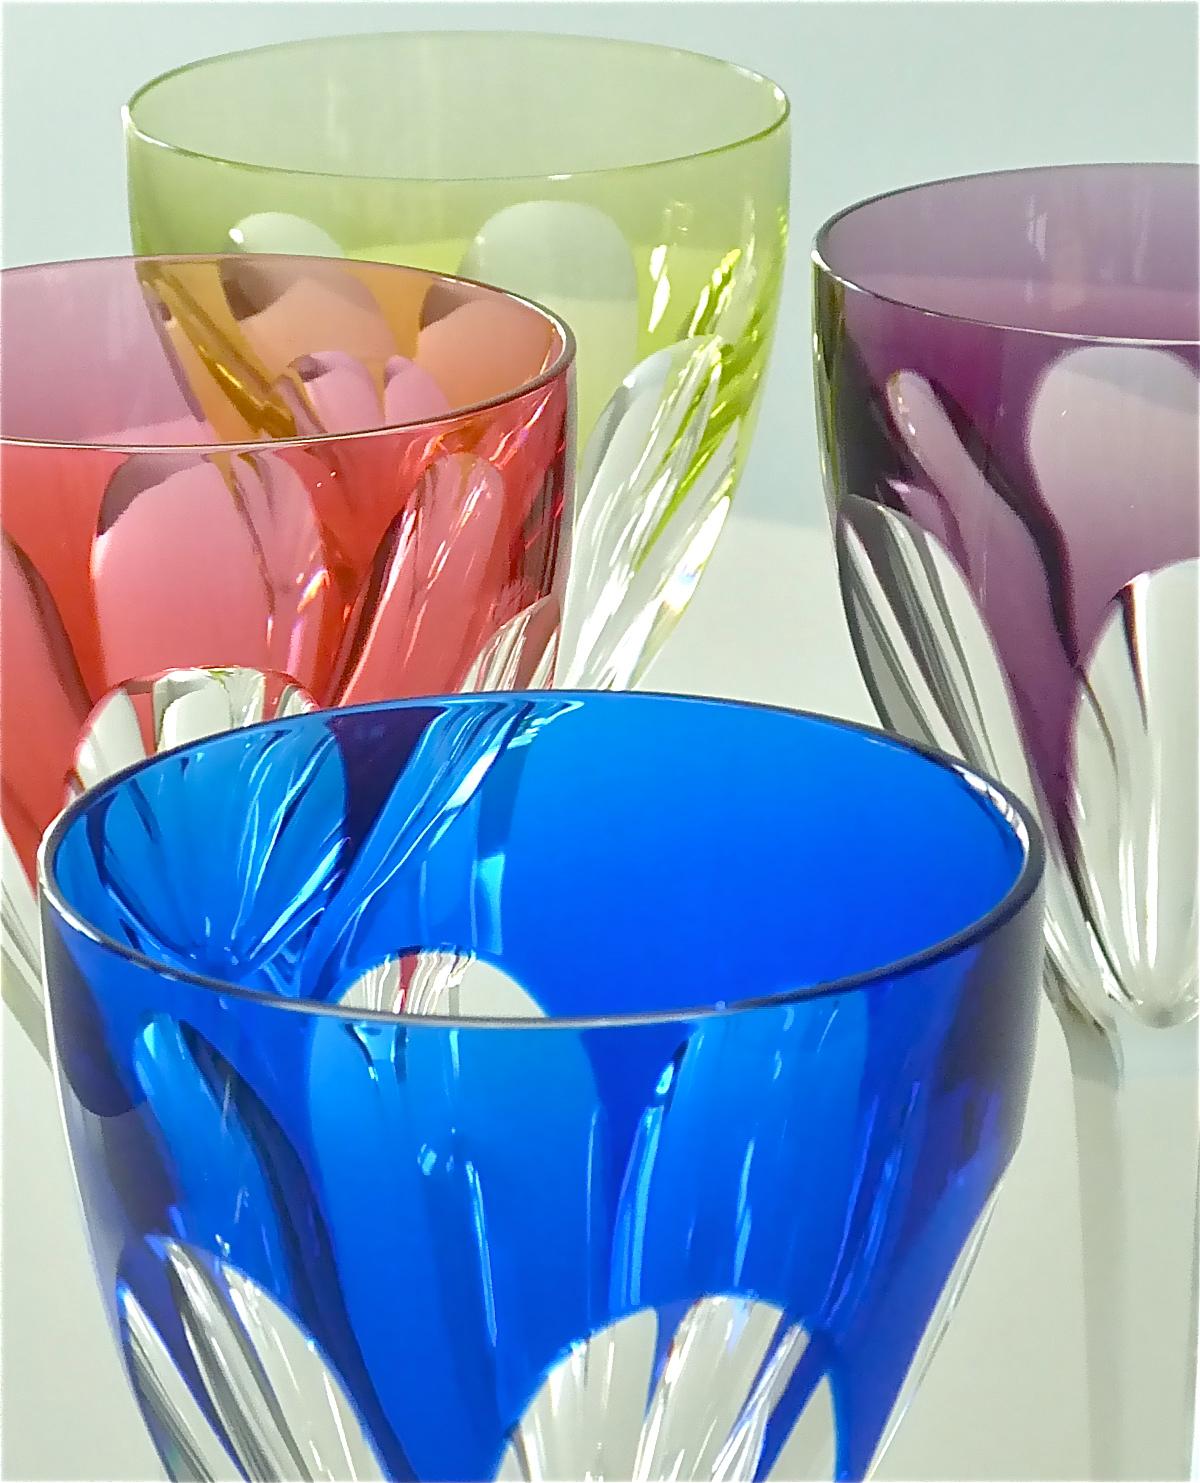 Exclusive set of six gorgeous and fine hand-cut crystal wine glasses in colors light ocean-blue and dark vibrant blue, light yellow-green and green, violet and red made by Saint Louis France around 1960-70. Saint Louis France which is the oldest